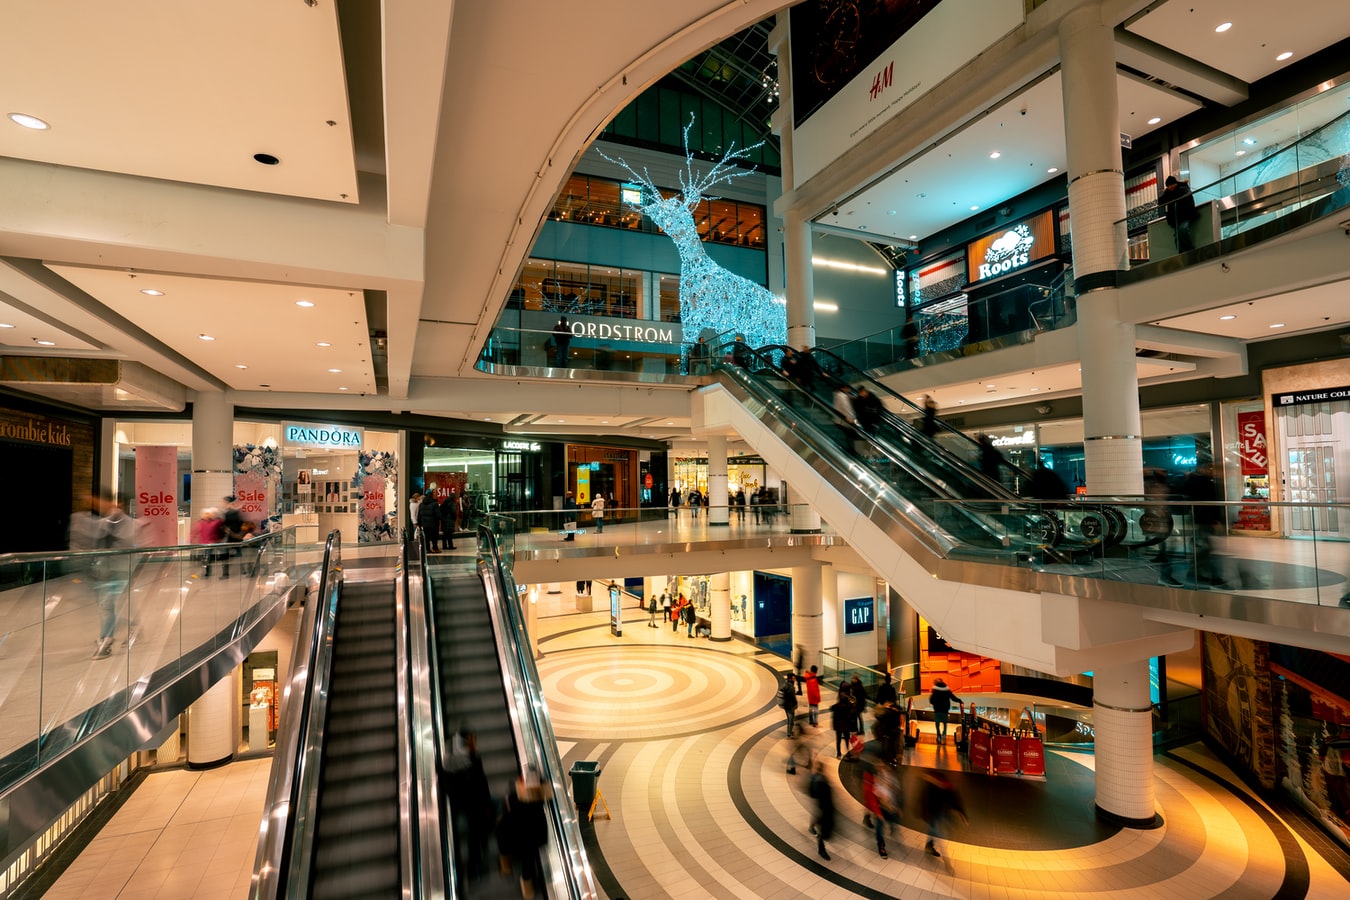 Marketing for malls, Covid 19 affects shopping malls, marketing for malls during COVID-19, covid-19 marketing strategy